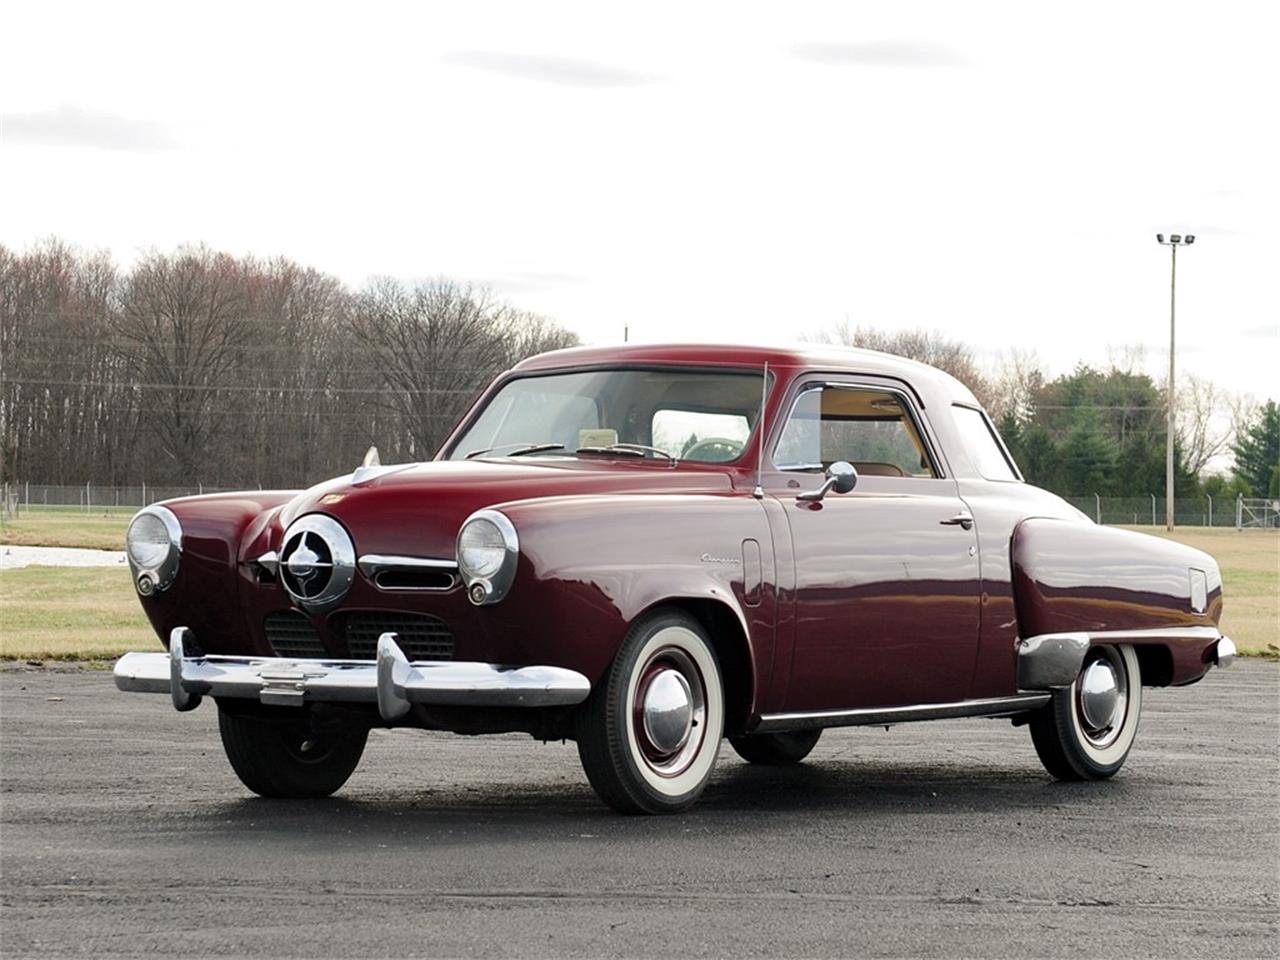 For Sale at Auction: 1950 Studebaker Champion for sale in Auburn, IN